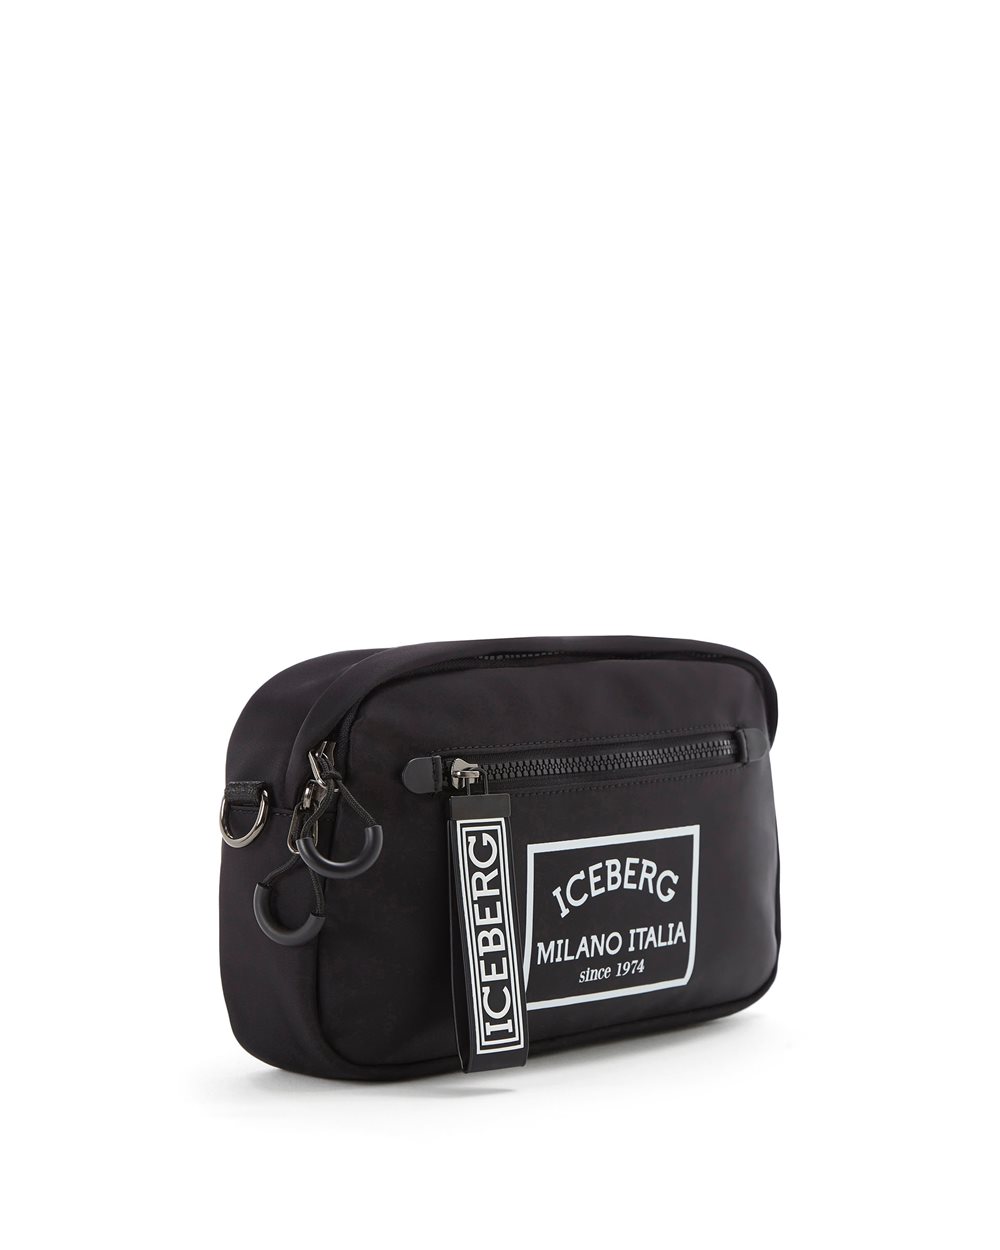 Pouch with shoulder strap - Iceberg - Official Website